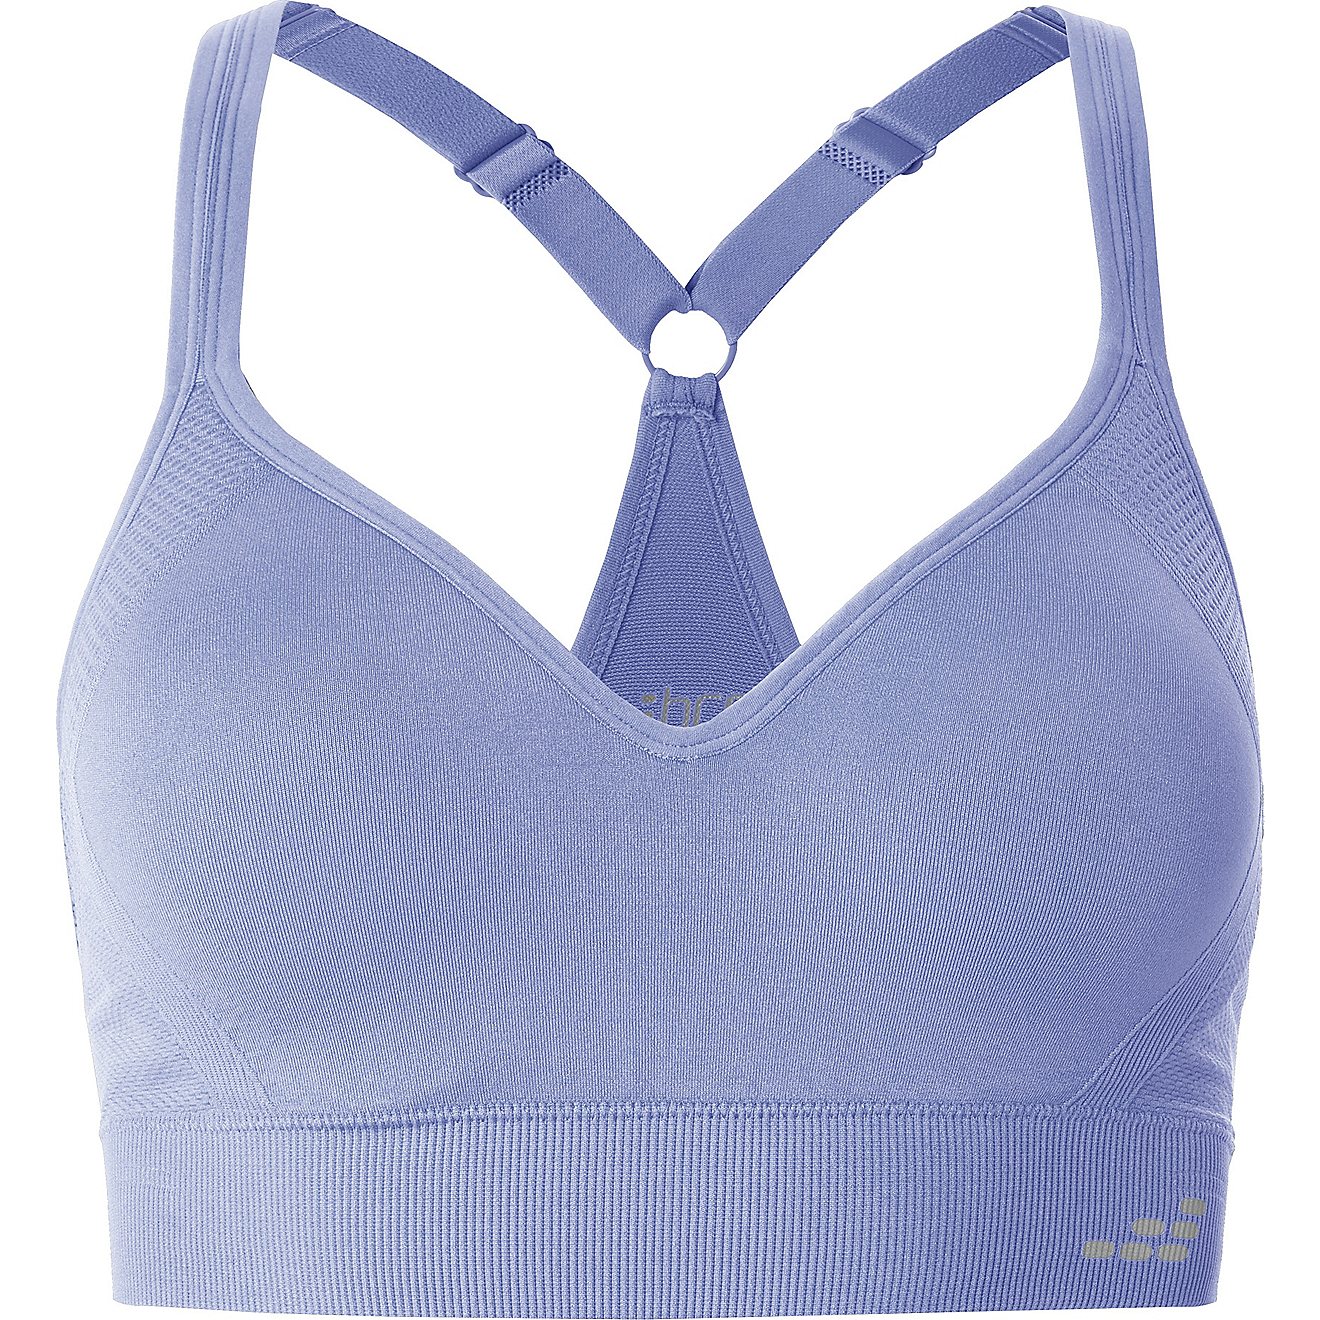 BCG Women's Low Support Molded Cup Sports Bra                                                                                    - view number 1